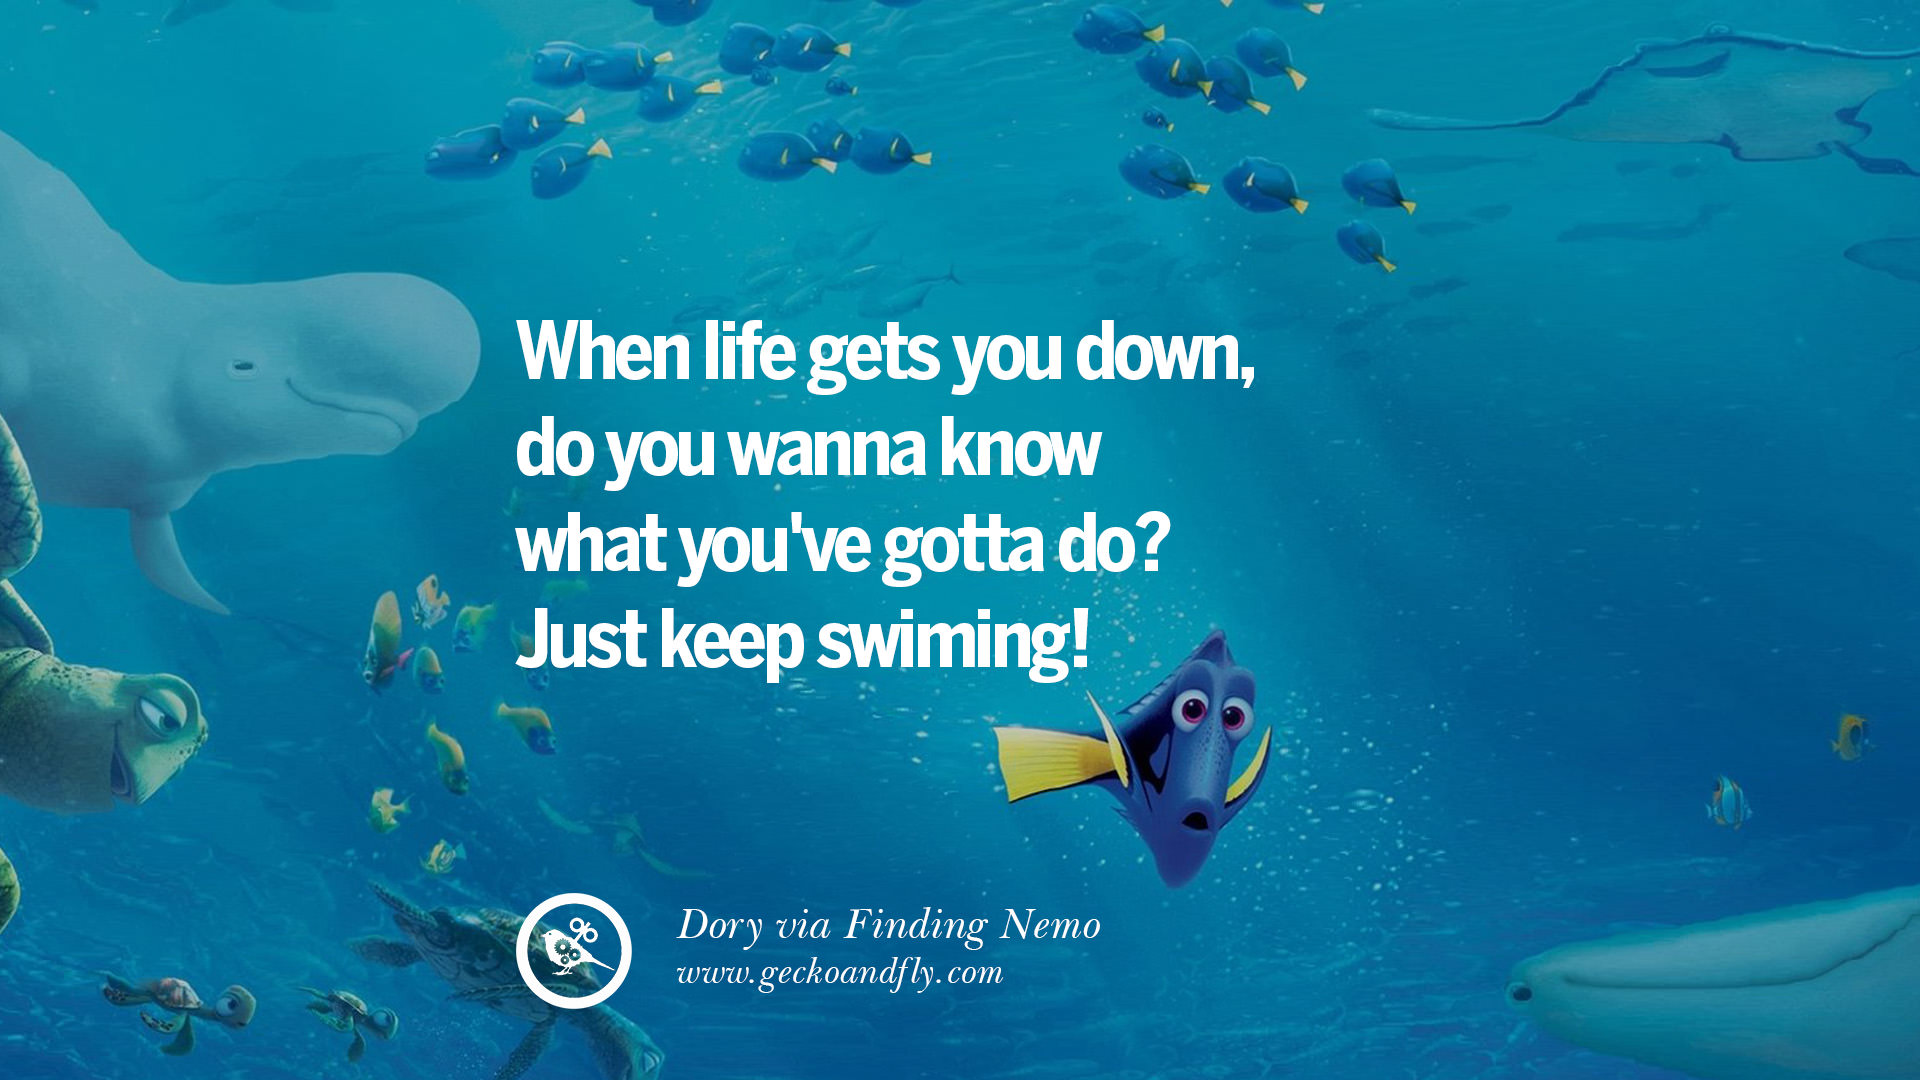 Wallpaper Just Keep Swimming Quote Wallpapers